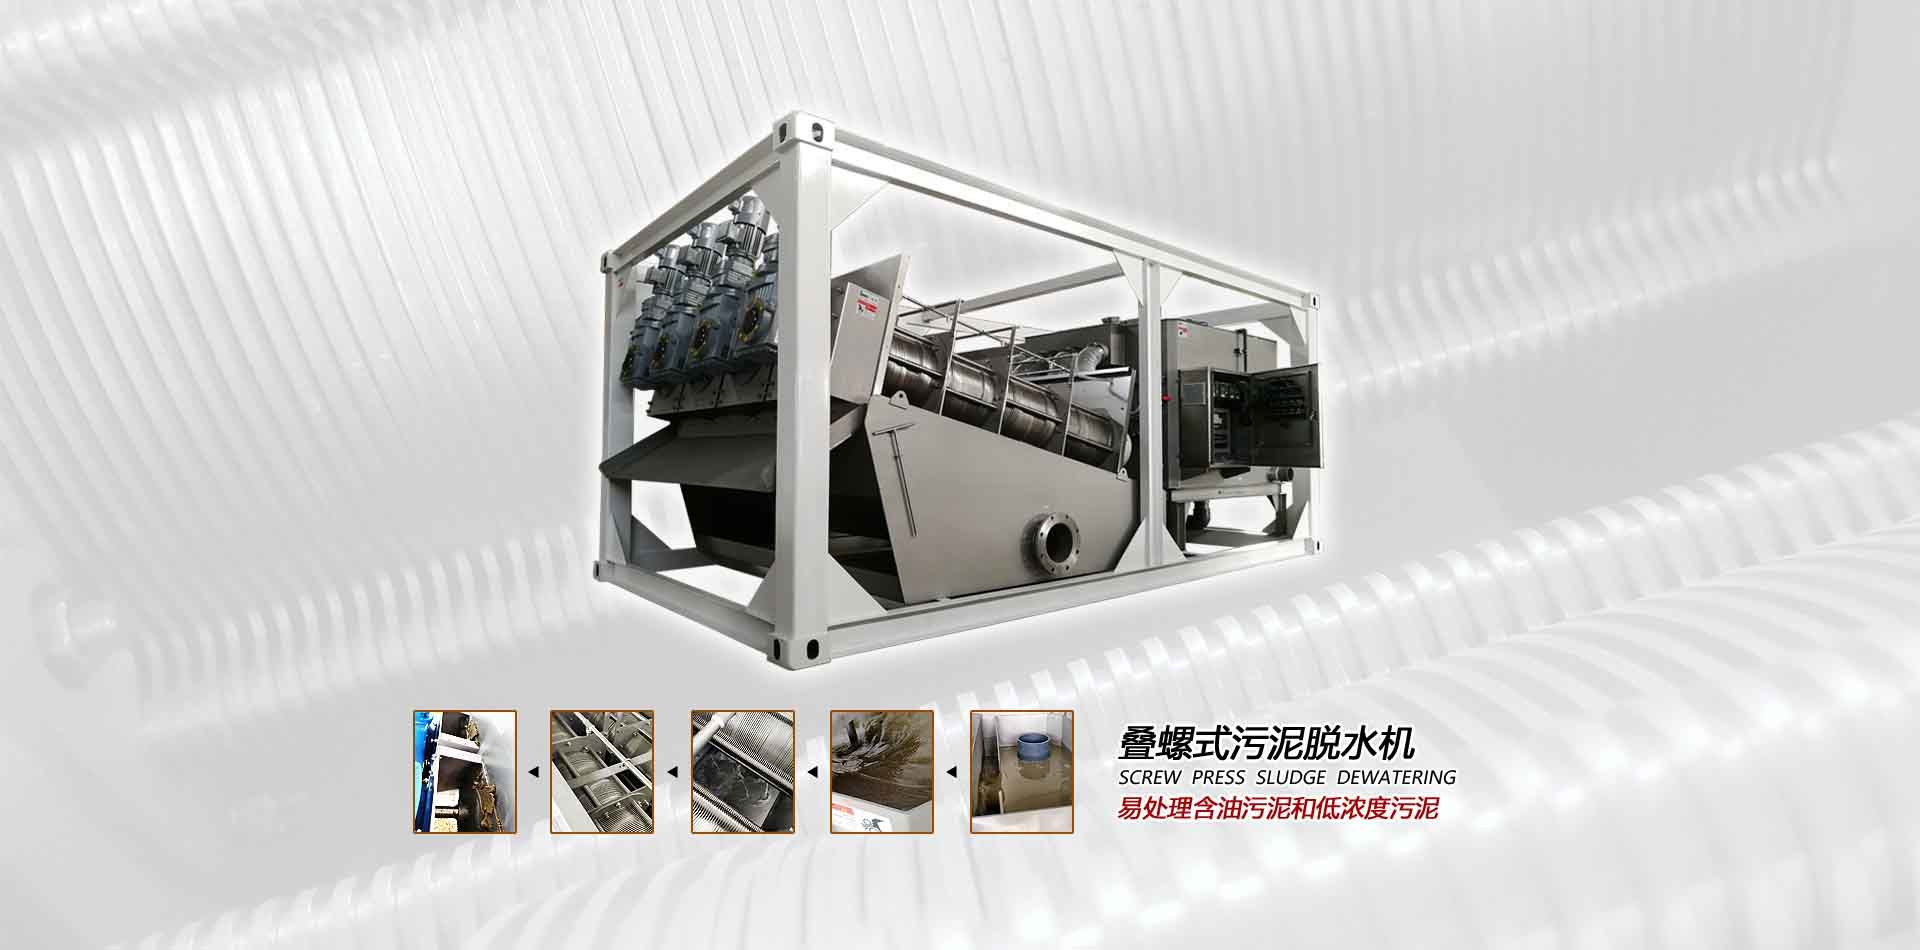 What are the advantages of automatic dosing machine?